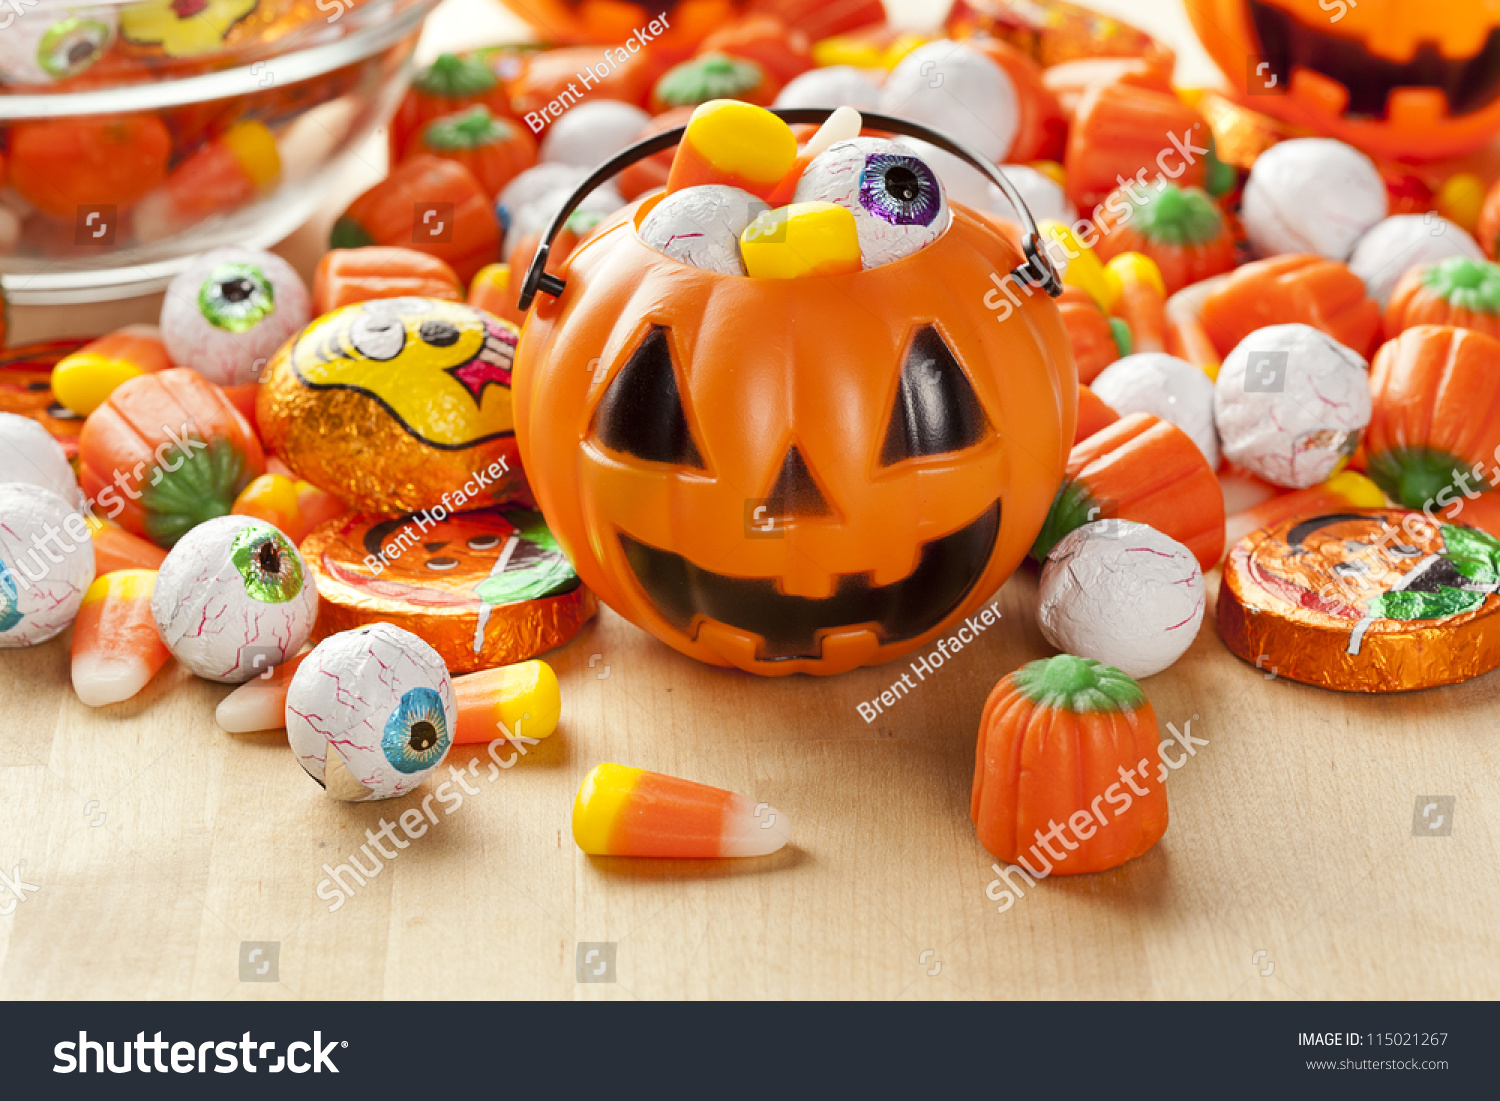 Spooky Orange Halloween Candy Against A Background Stock Photo ...